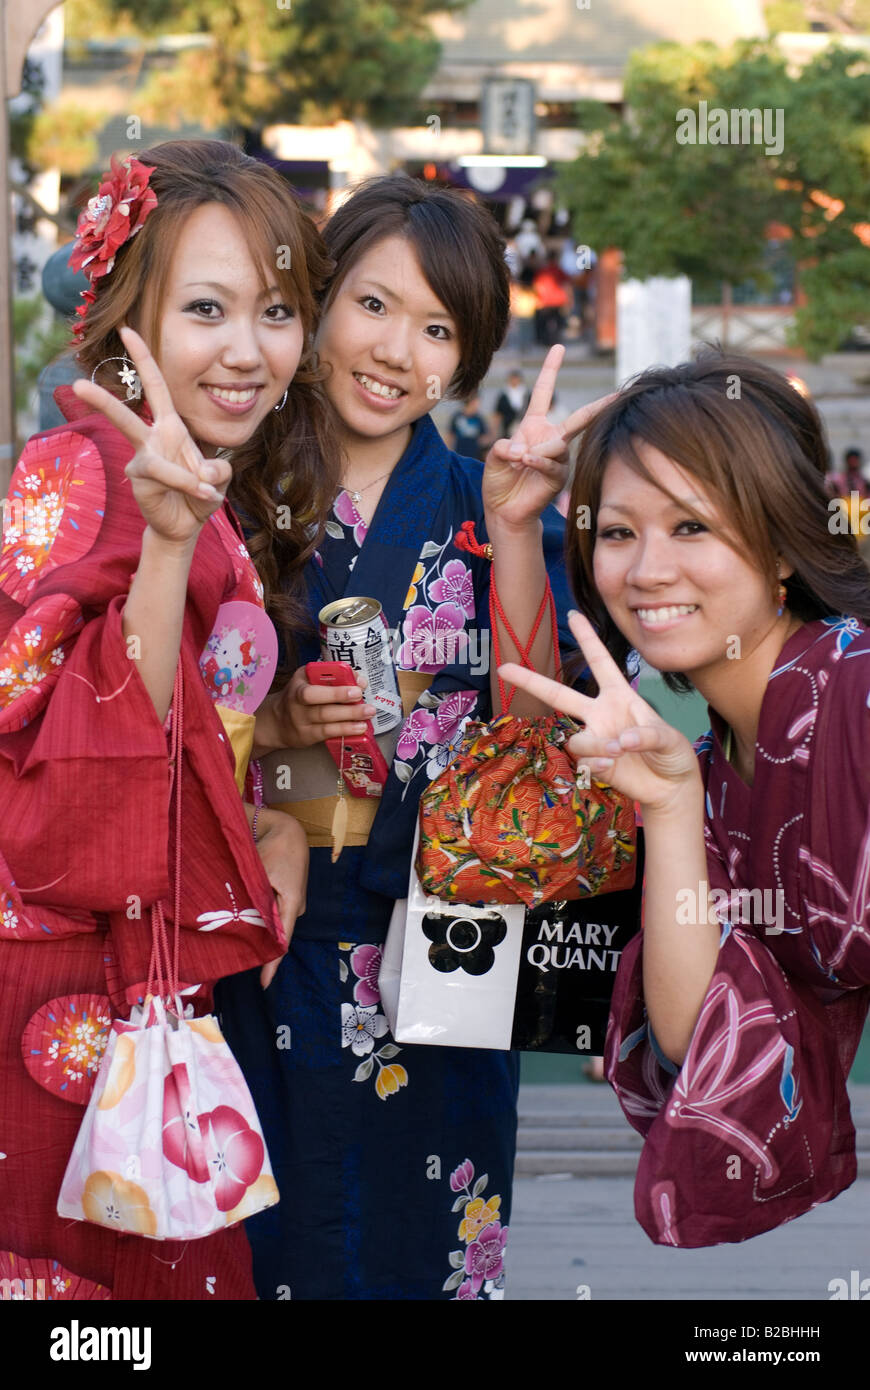 Three happy girls wearing summer yukata robes flash the peace sign when posing for a photograph Stock Photo